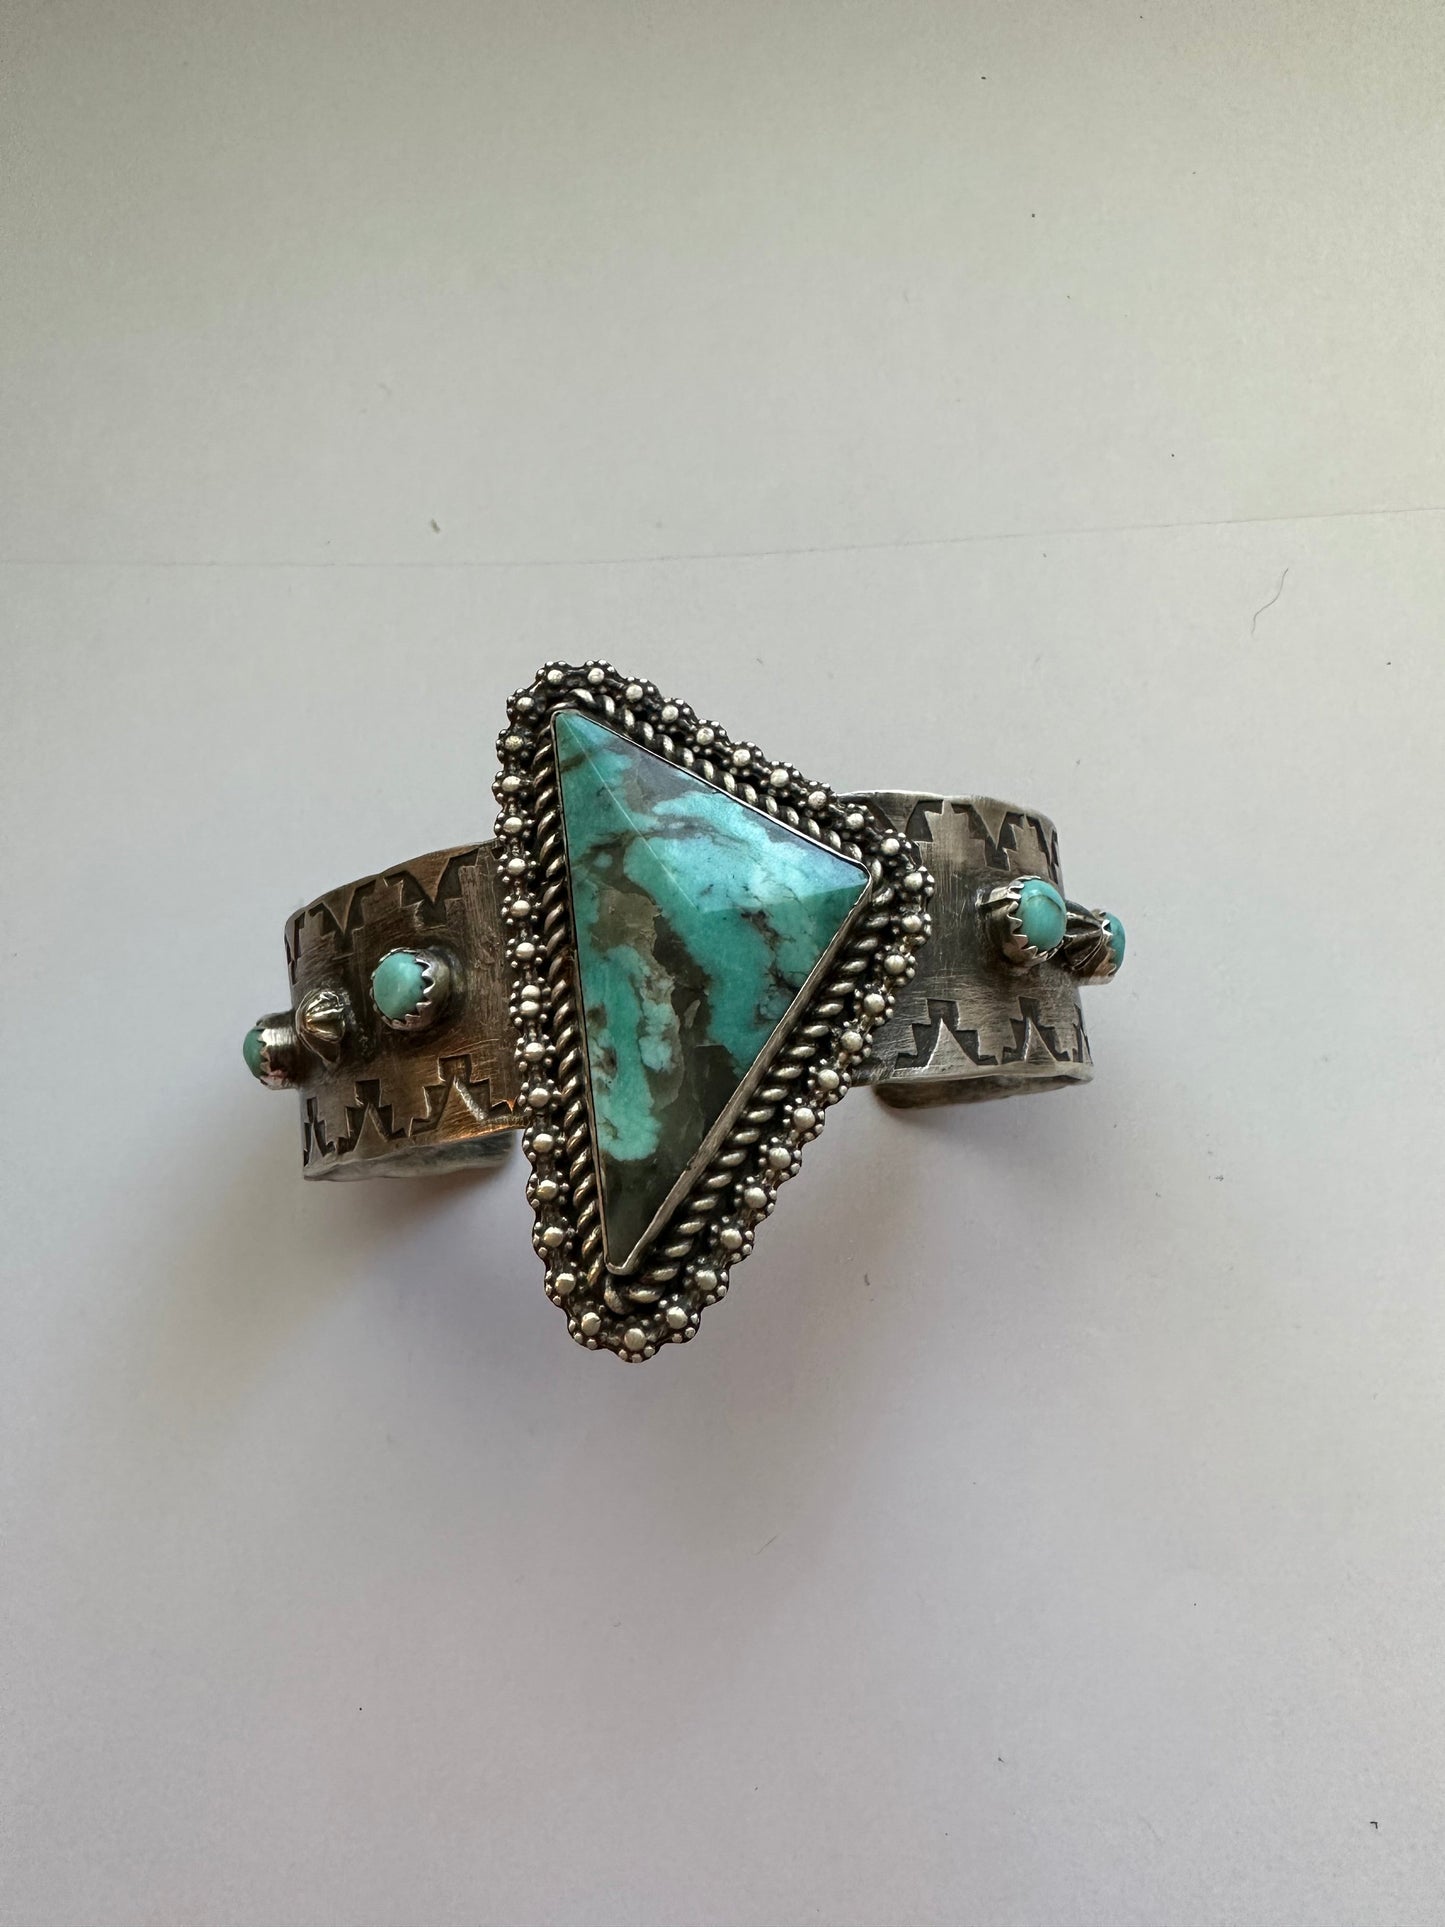 The Cadence Navajo Sterling Silver Turquoise Bracelet Cuff Signed